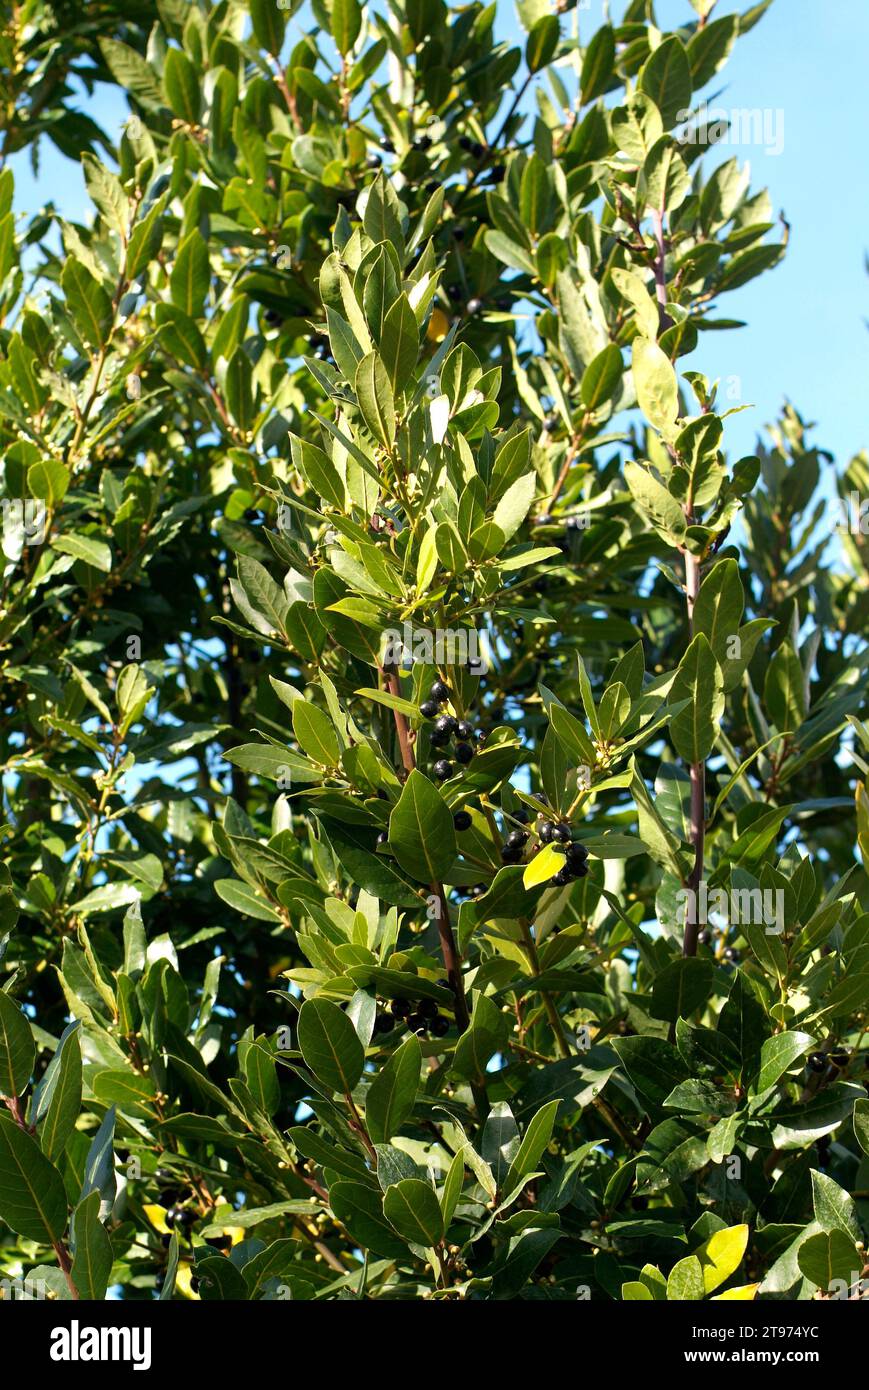 Laurel (Laurus nobilis)  is an evergreen tree aromatic, culinary and medicinal, native to Mediterranean Basin coastal. Fruits and leaves detail. Stock Photo